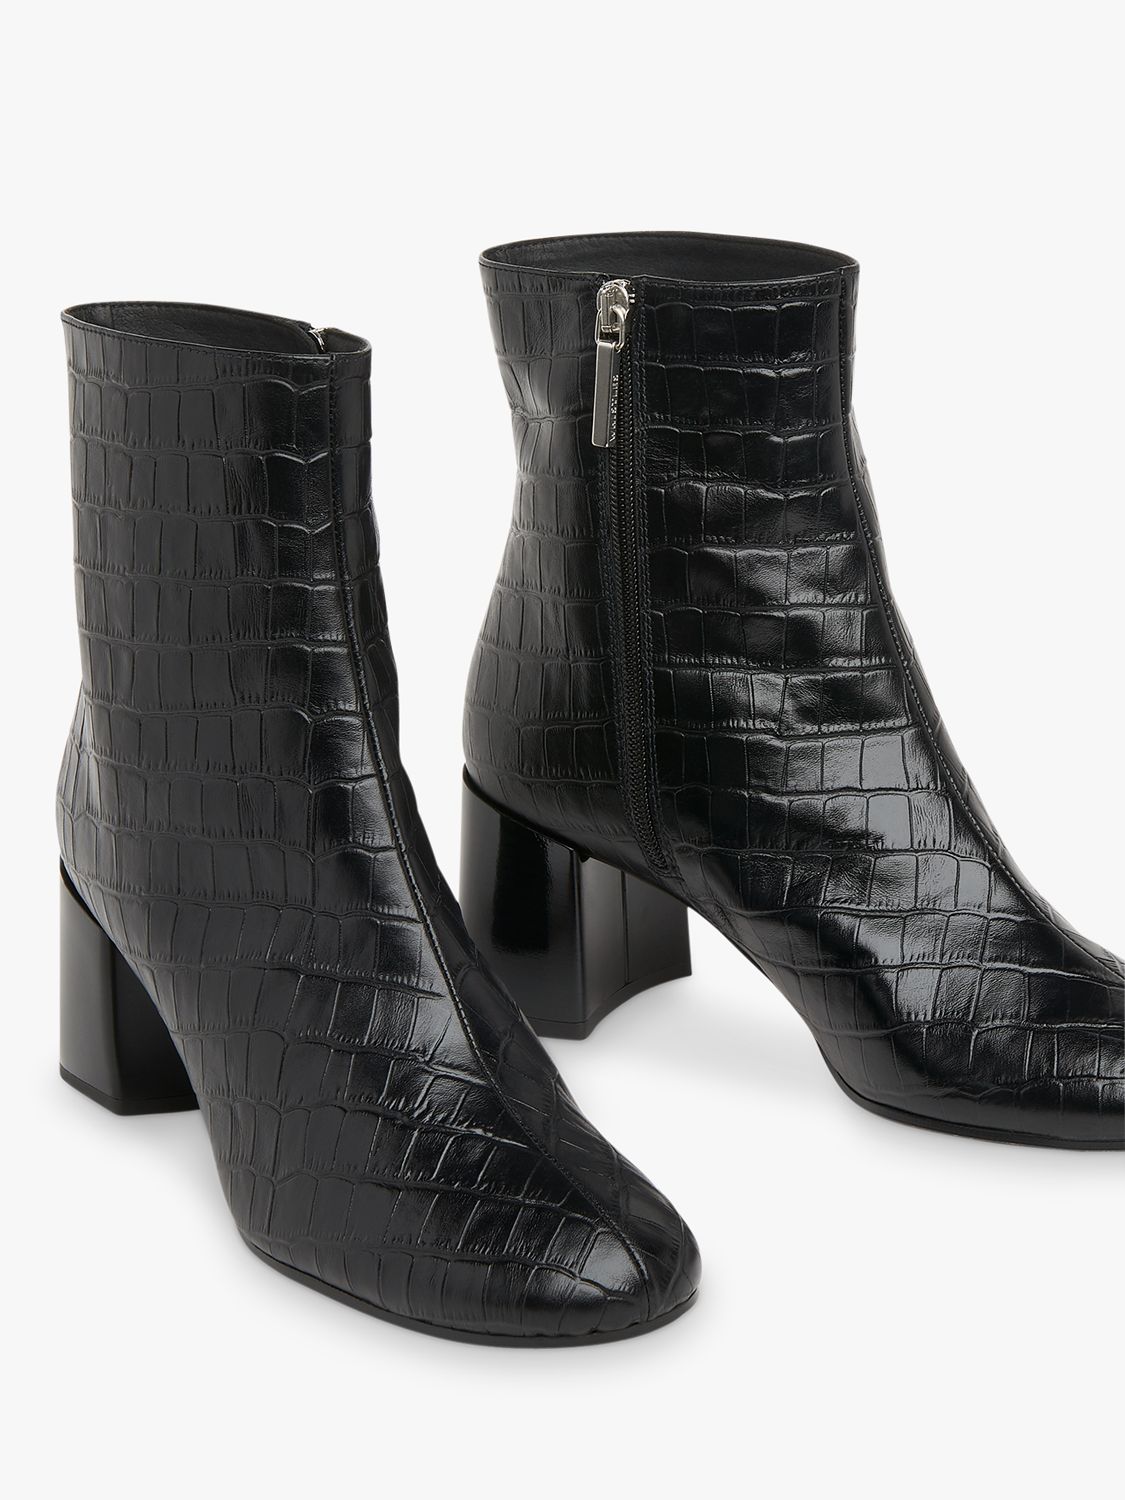 Whistles Elora Leather Croc Effect Ankle Boots, Black at John Lewis ...